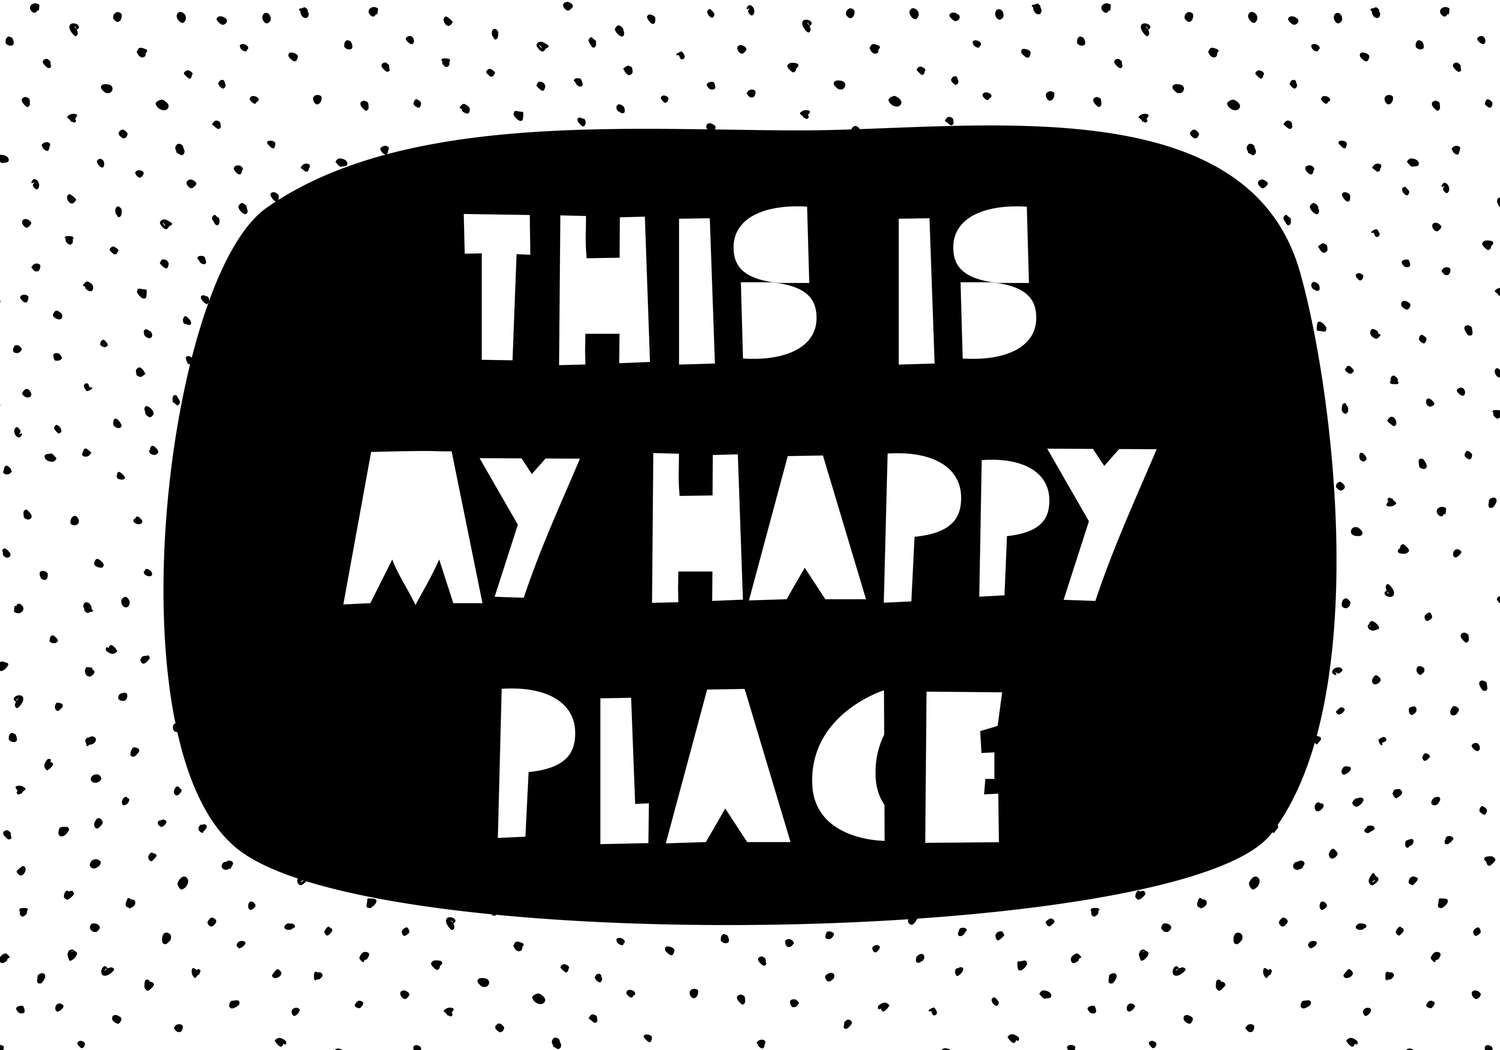             Photo wallpaper for children's room with lettering "This is my happy place" - Smooth & matt non-woven
        